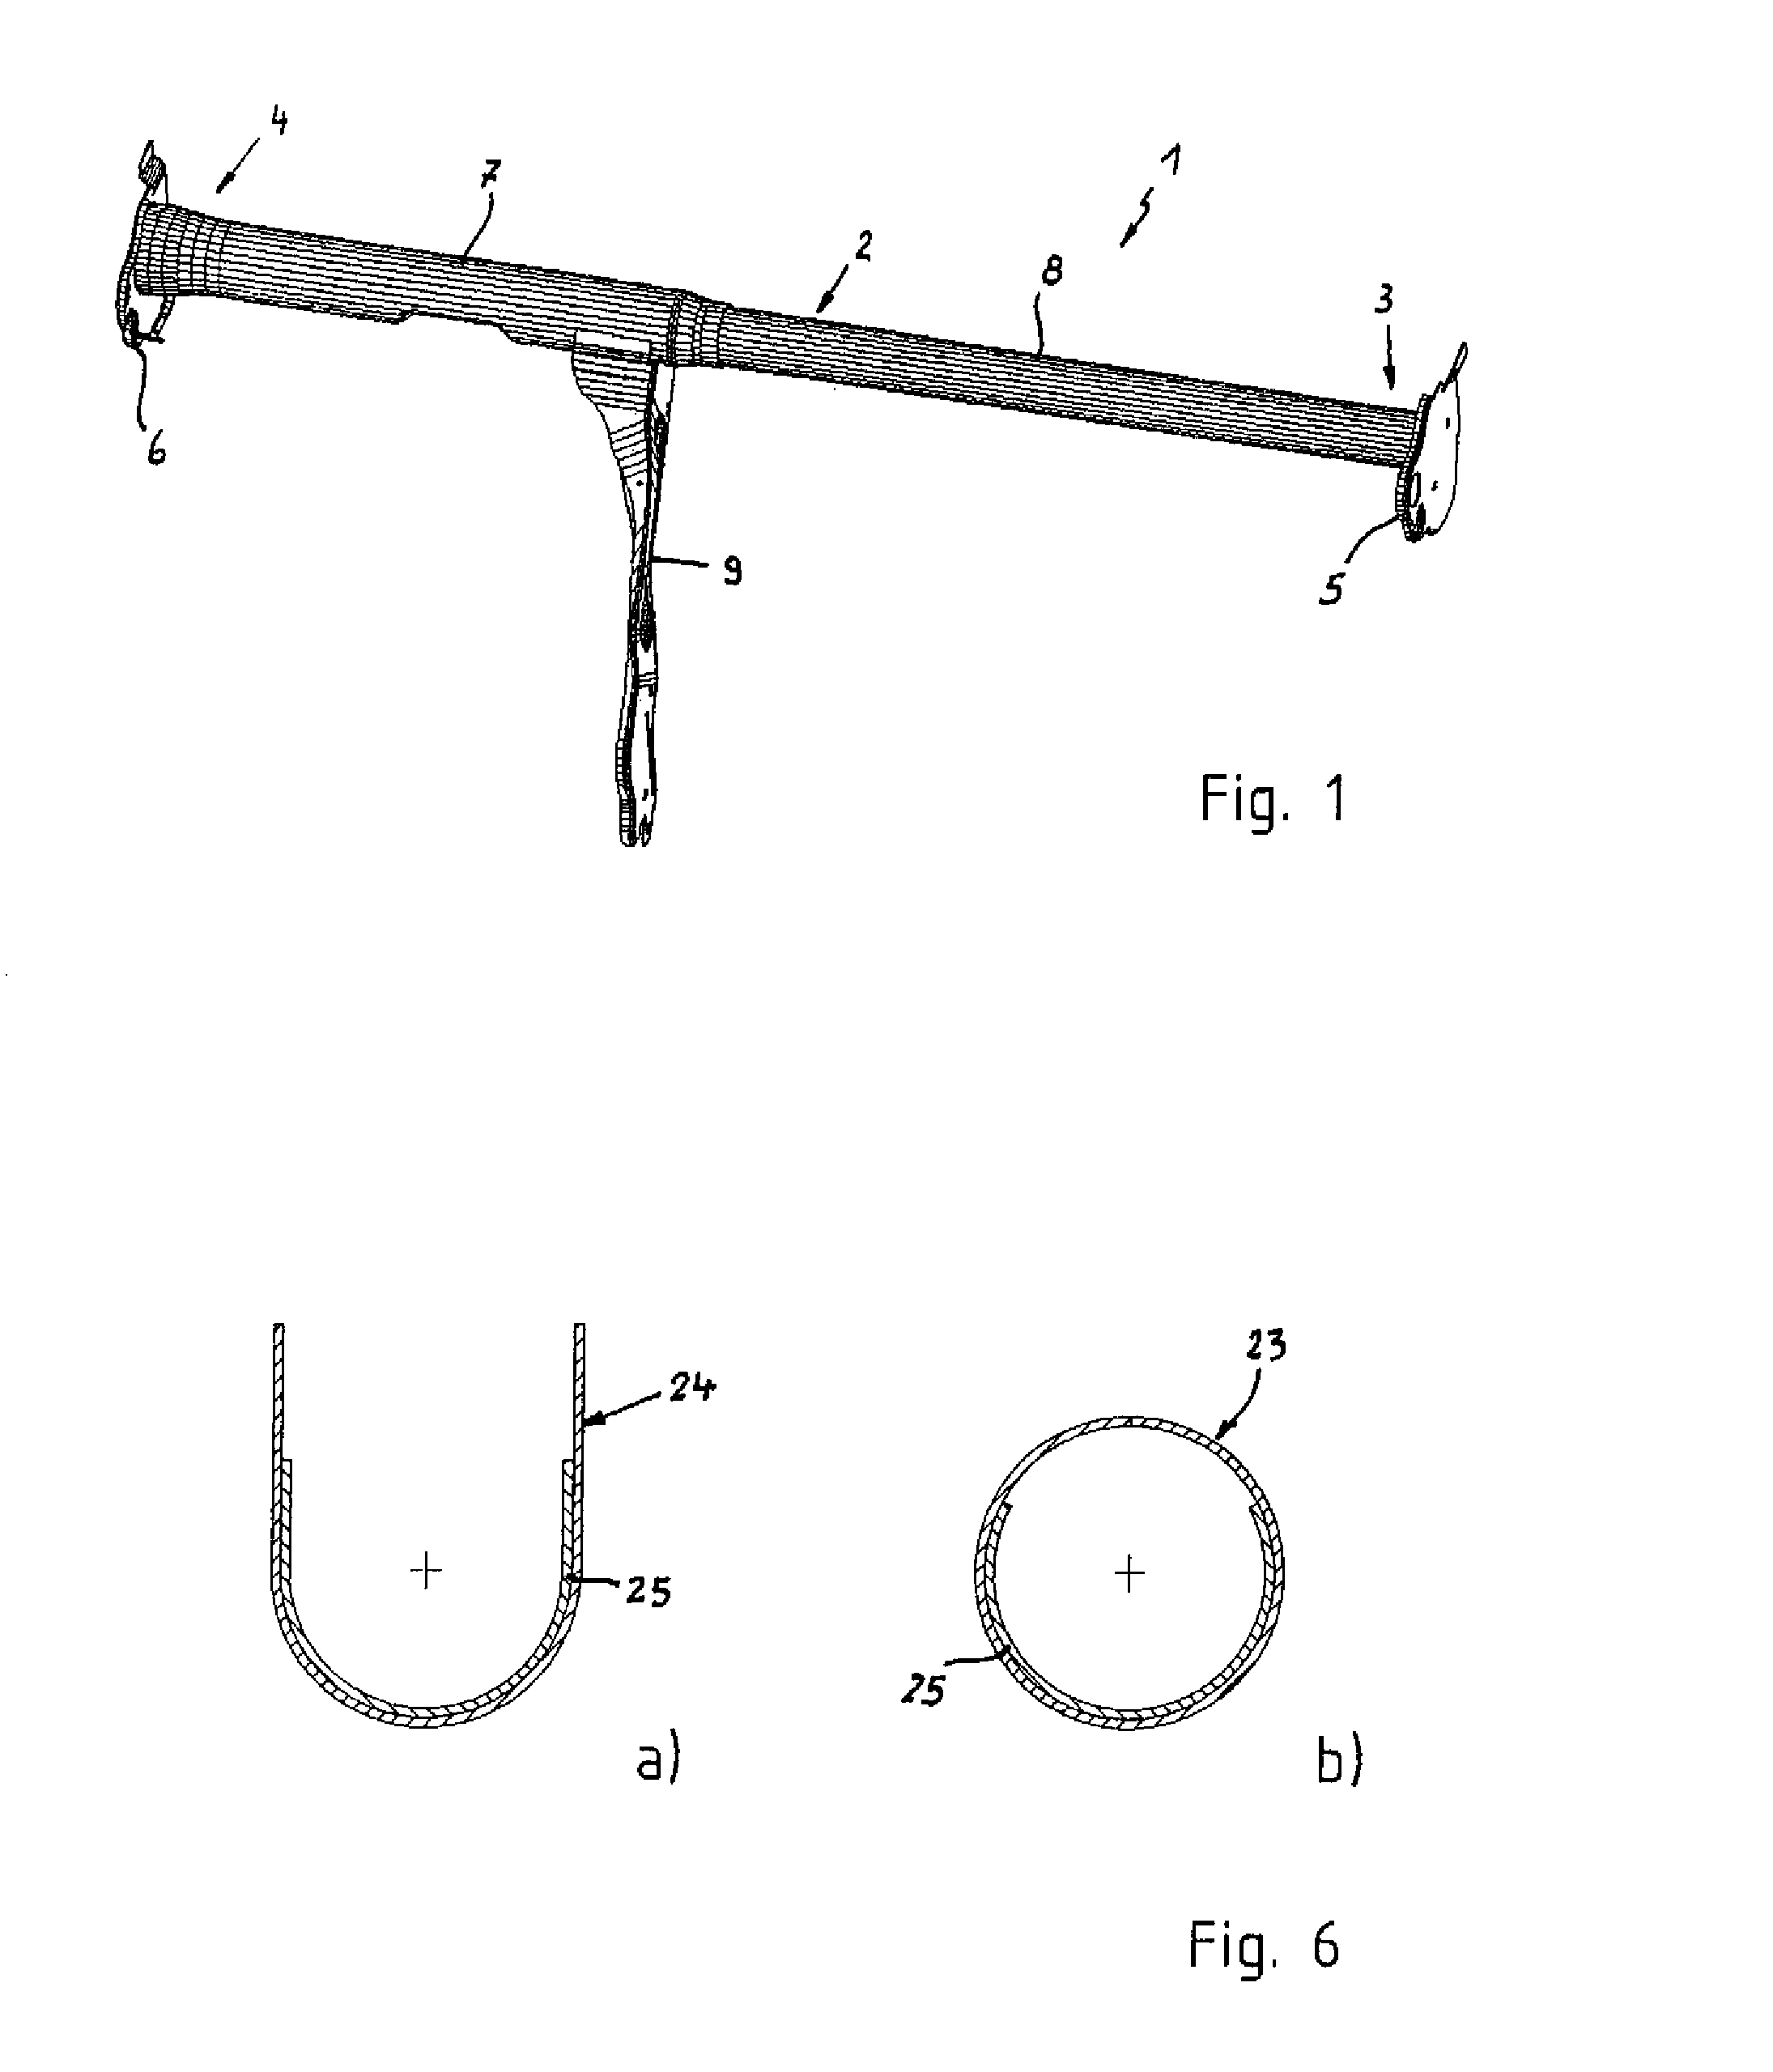 Method of making a tubular support bar for a dashboard support